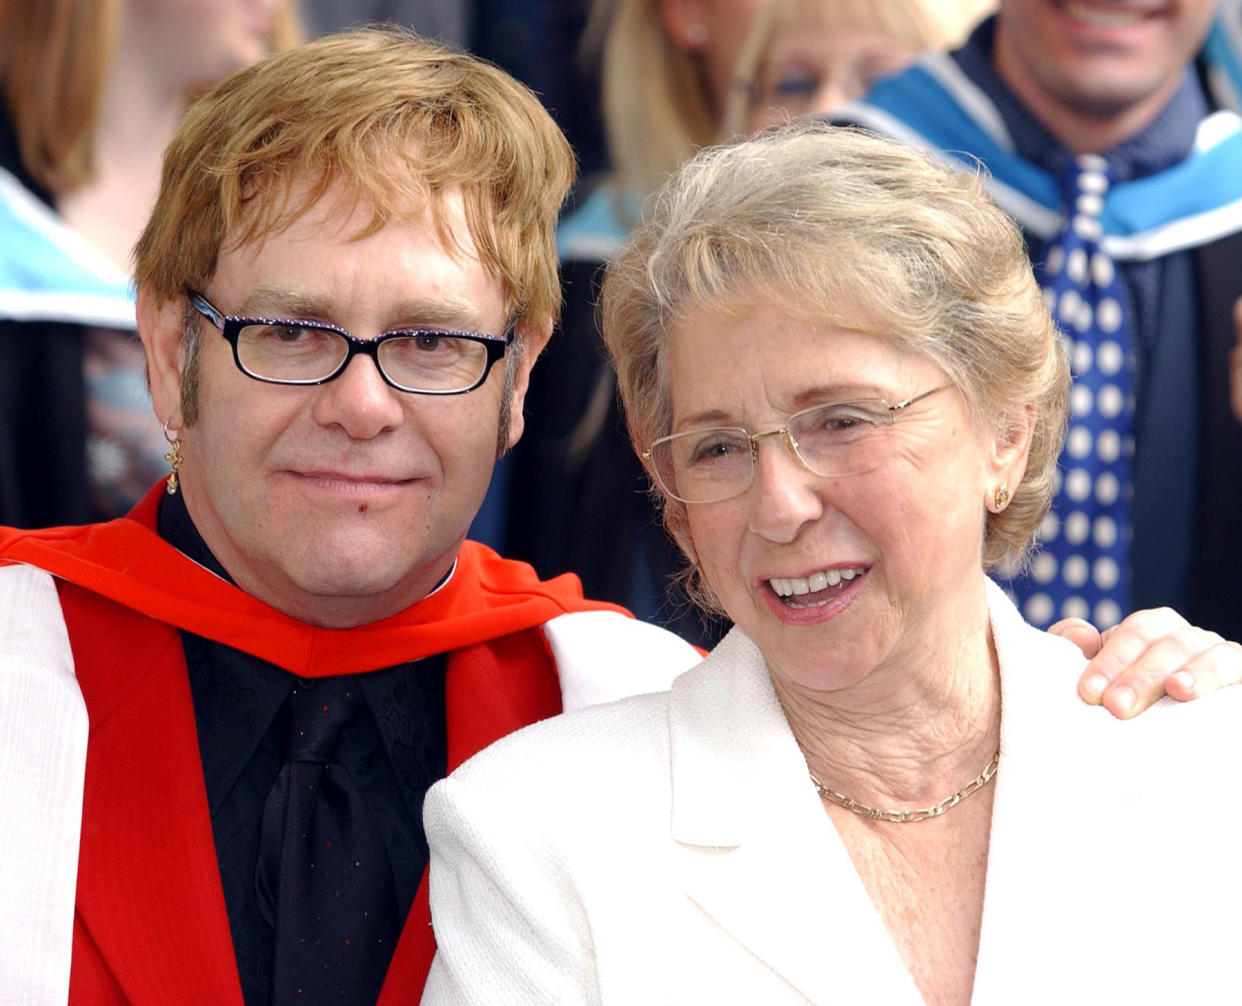 Sir Elton John said his mother was 'so against' his civil partnership with David Furnish. (Photo by Andy Butterton - PA Images/PA Images via Getty Images)